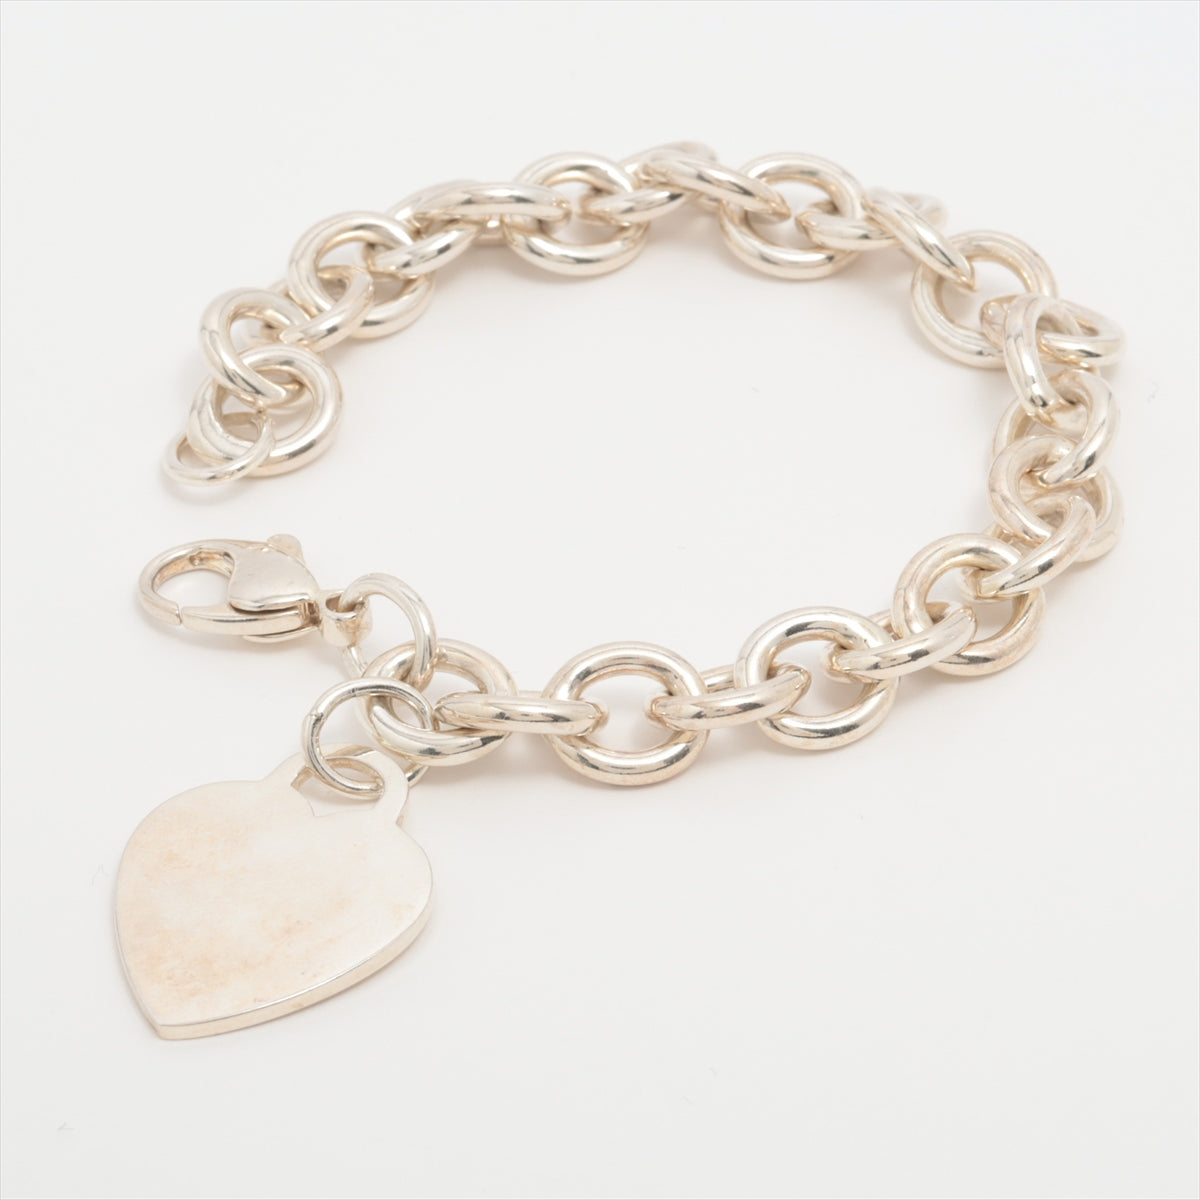 Tiffany Heart Tag Bracelet 925 34.7g Silver Wears Losing luster Discoloration Yes